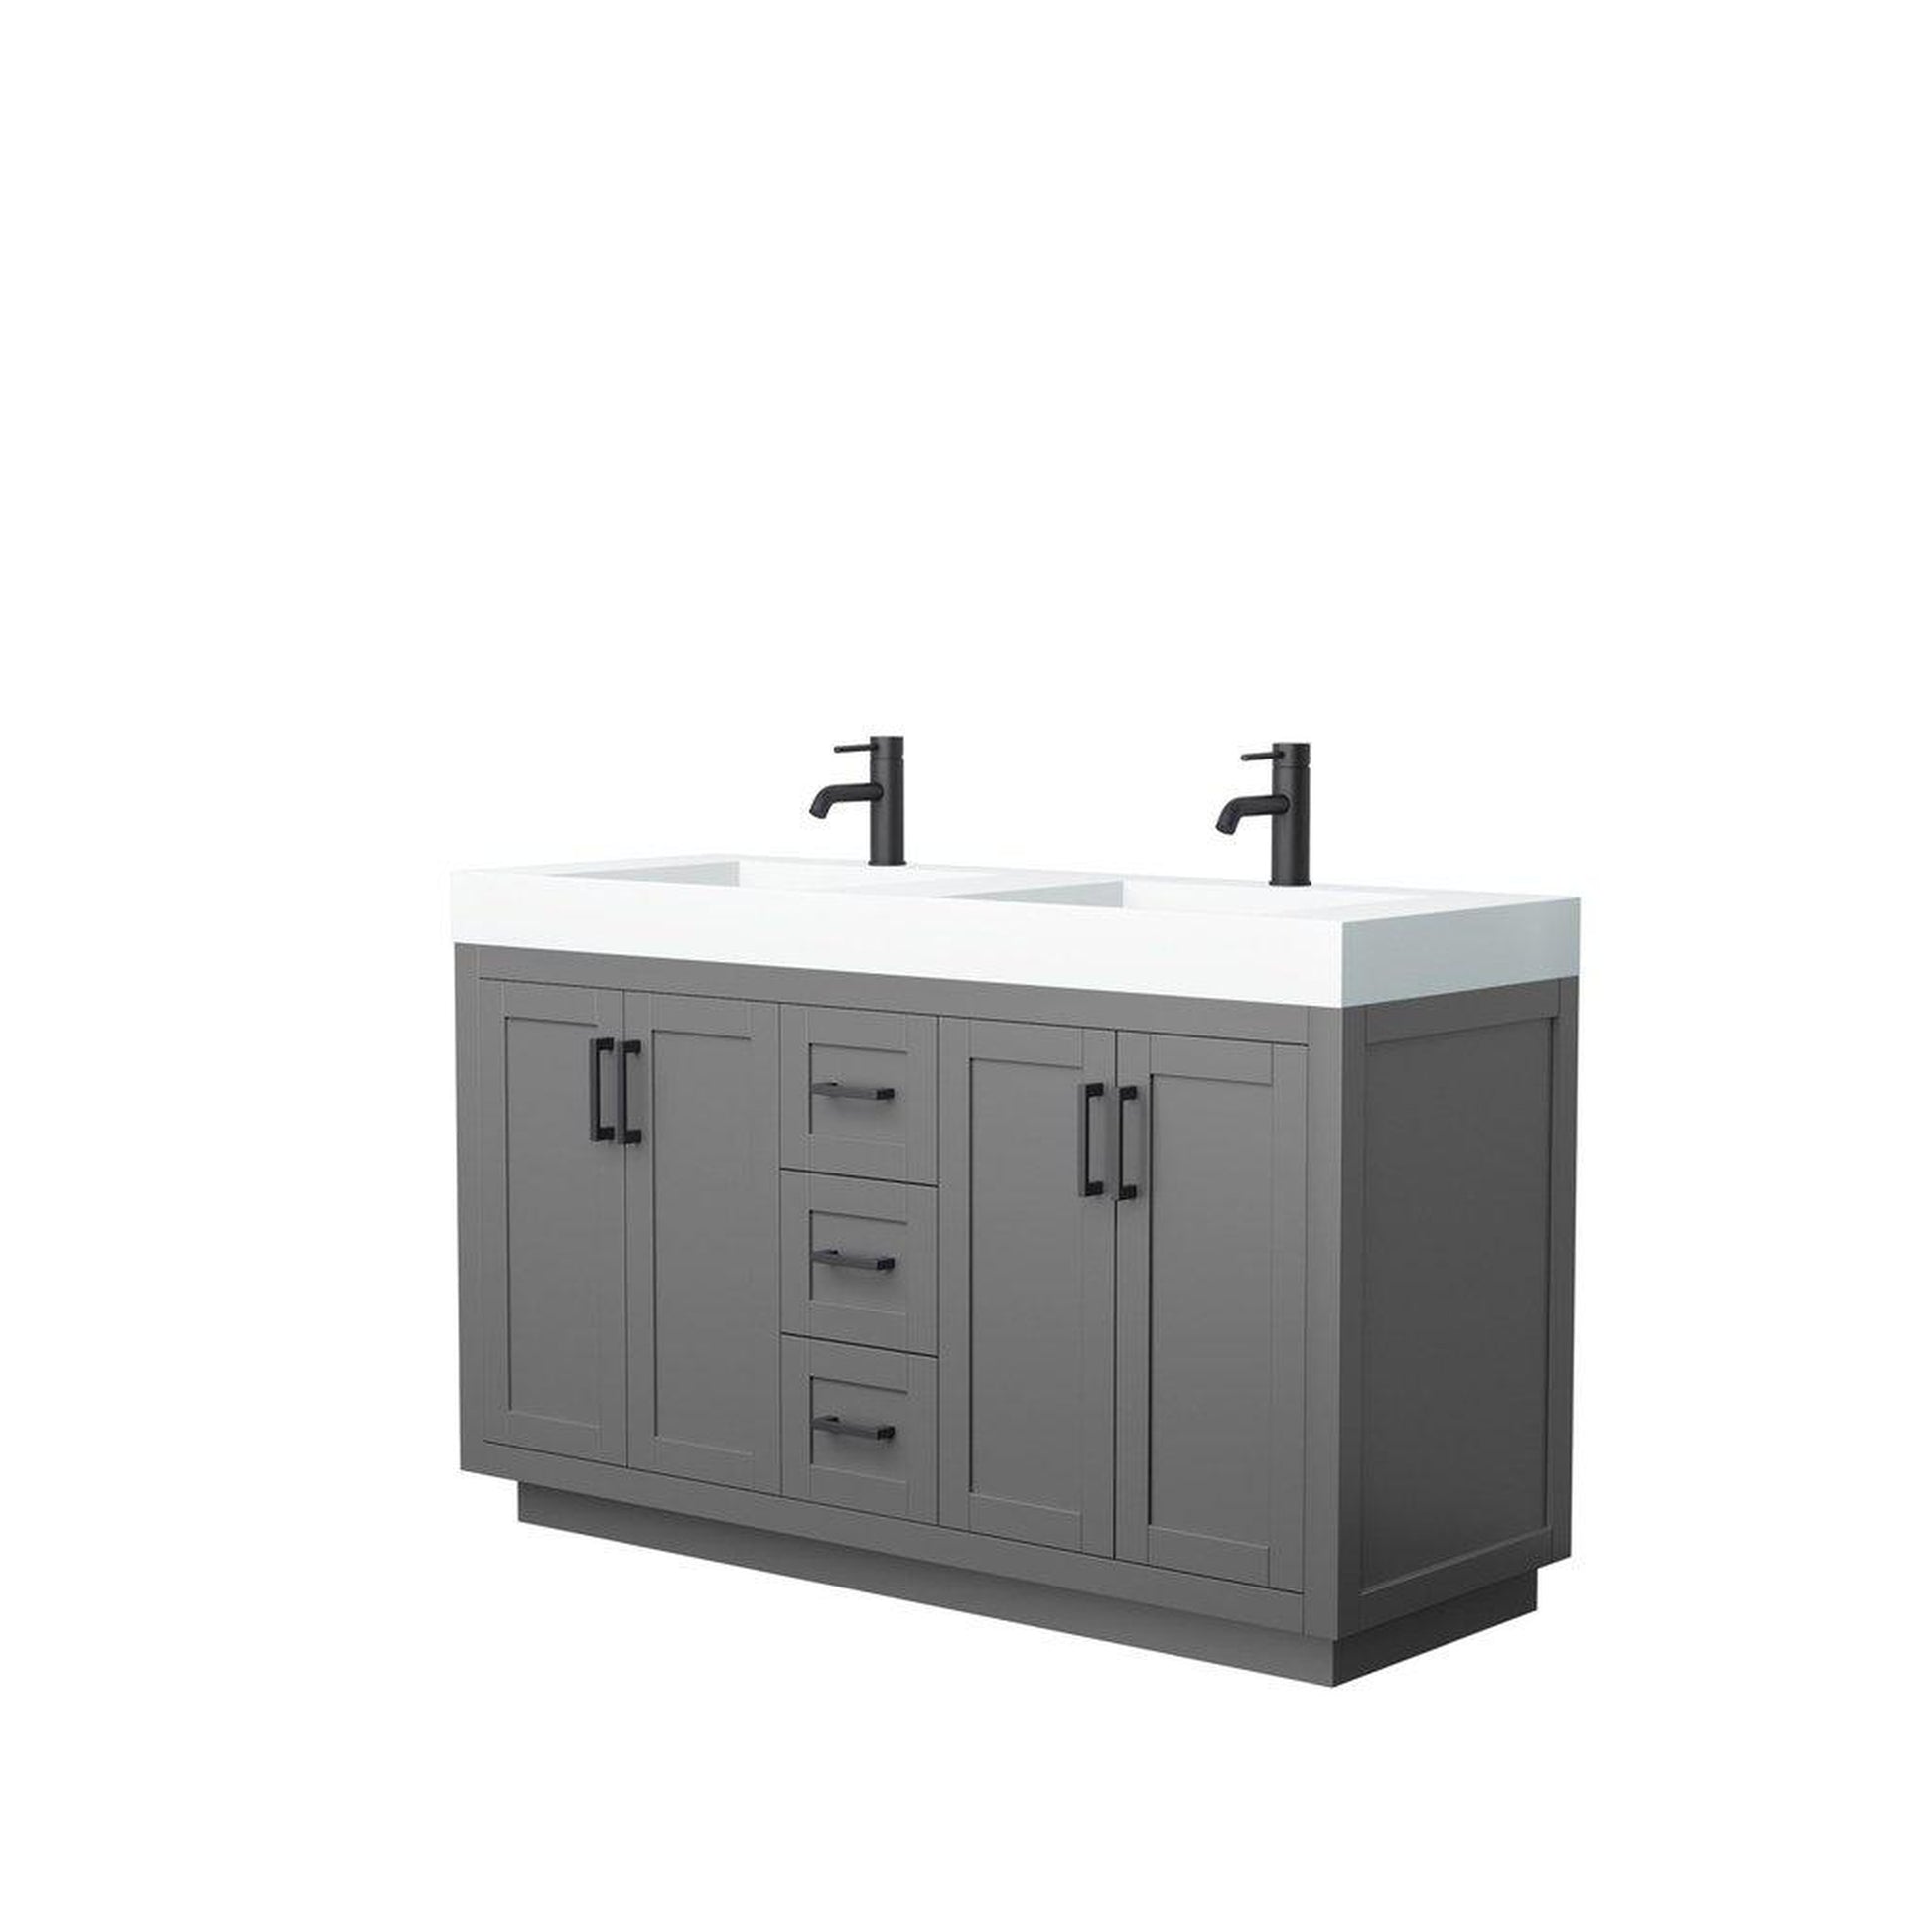 Wyndham Collection Miranda 60" Double Bathroom Dark Gray Vanity Set With 4" Thick Matte White Solid Surface Countertop, Integrated Sink, And Matte Black Trim